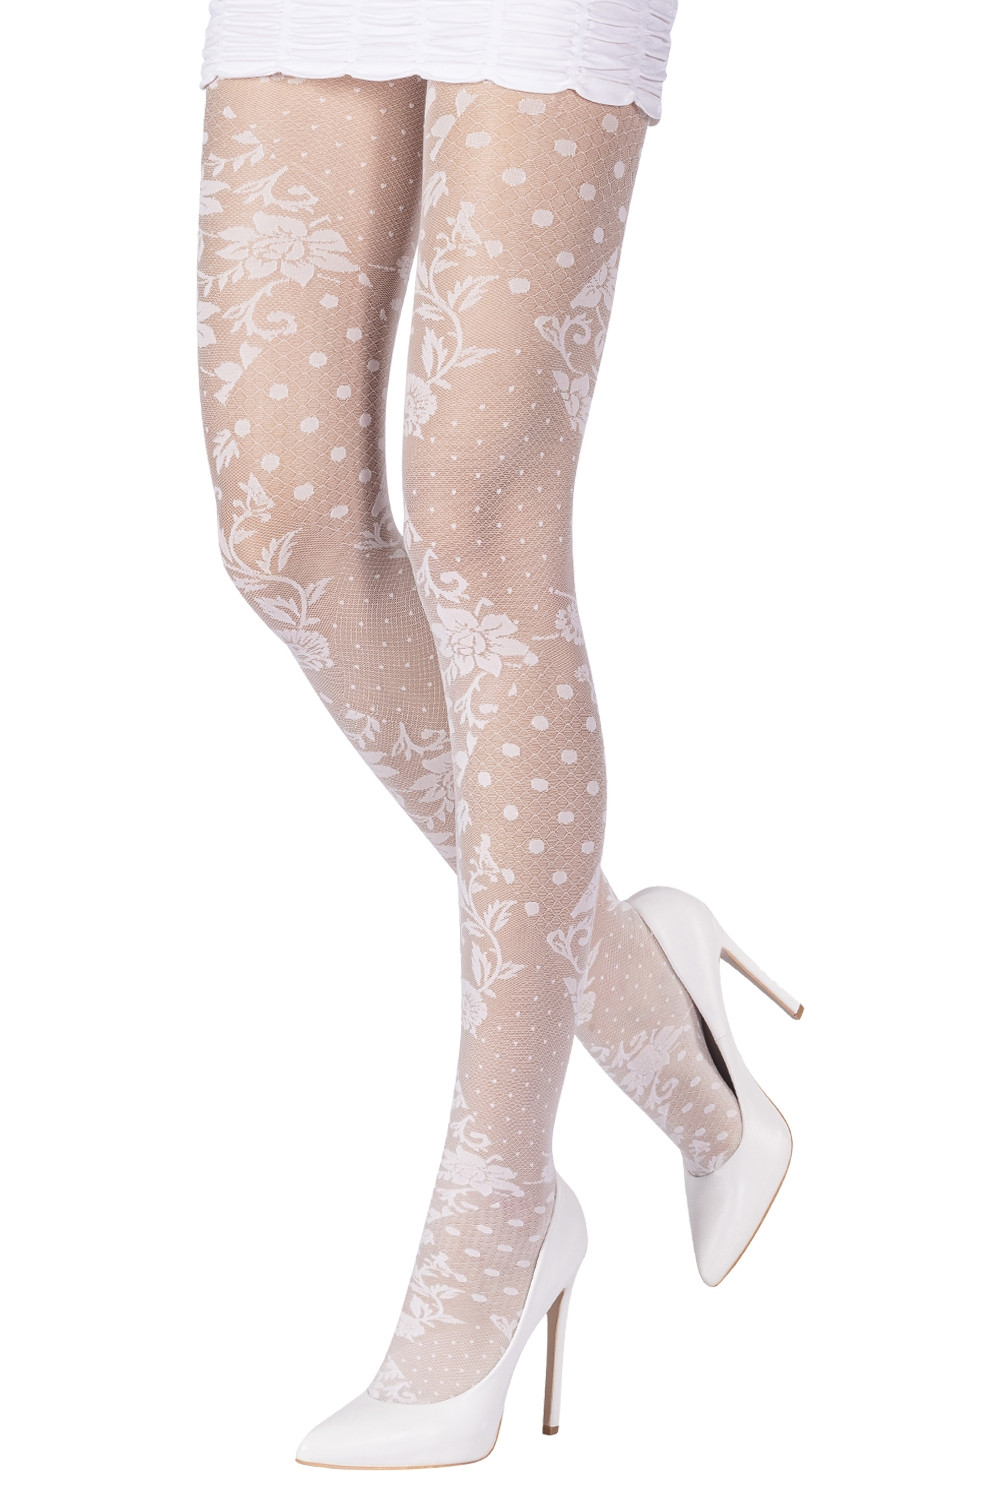 Patchwork Lace Tights, Tights & Hosiery, Women